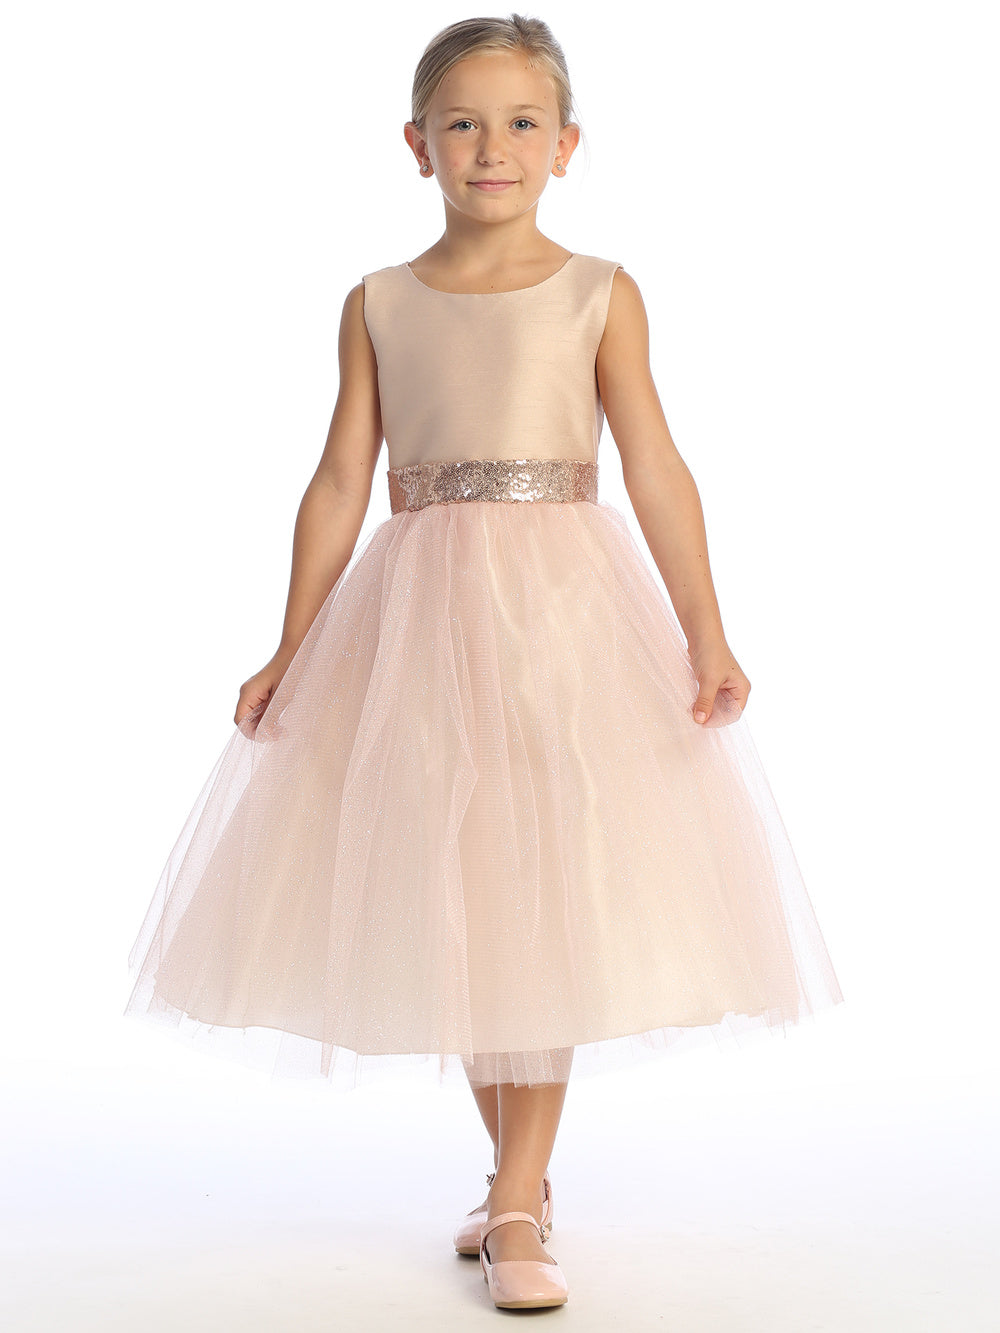 Flower girl glows in blush shantung dress, sequins shimmering in the tulle.